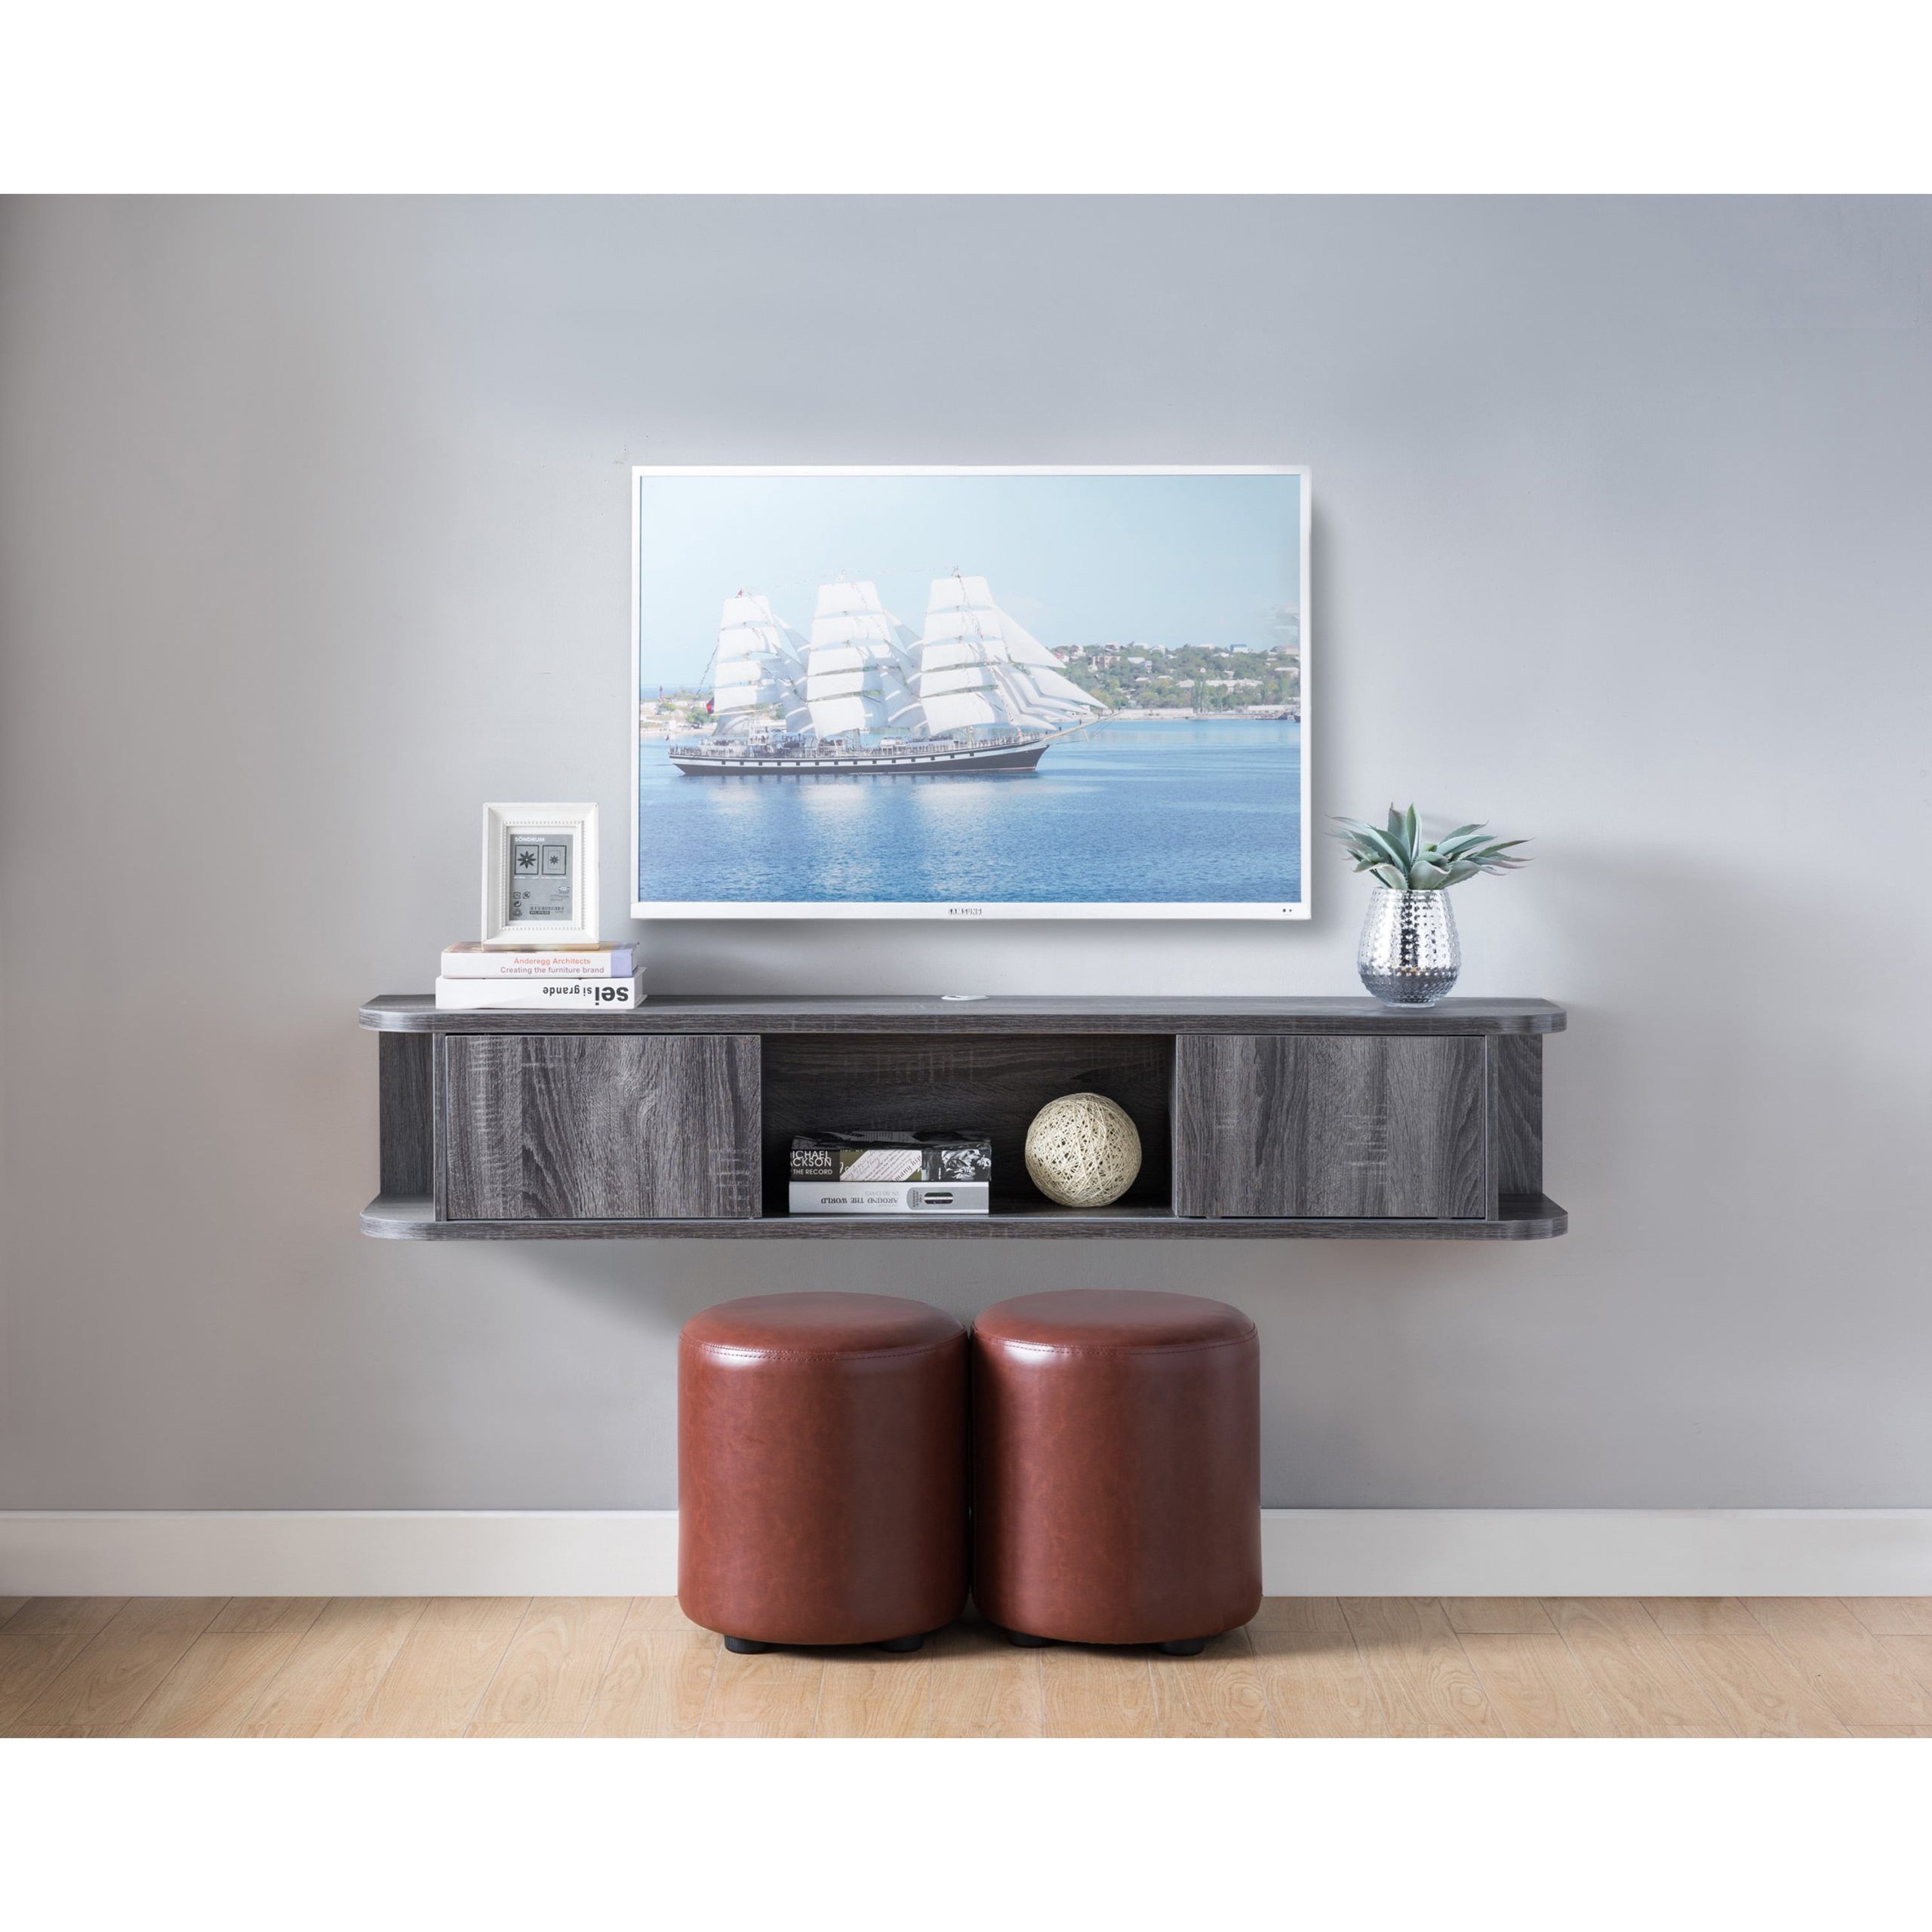 Furniture Of America Fernandu 3 Shelf Floating Tv Stand, Distressed With Regard To Floating Stands For Tvs (View 14 of 20)